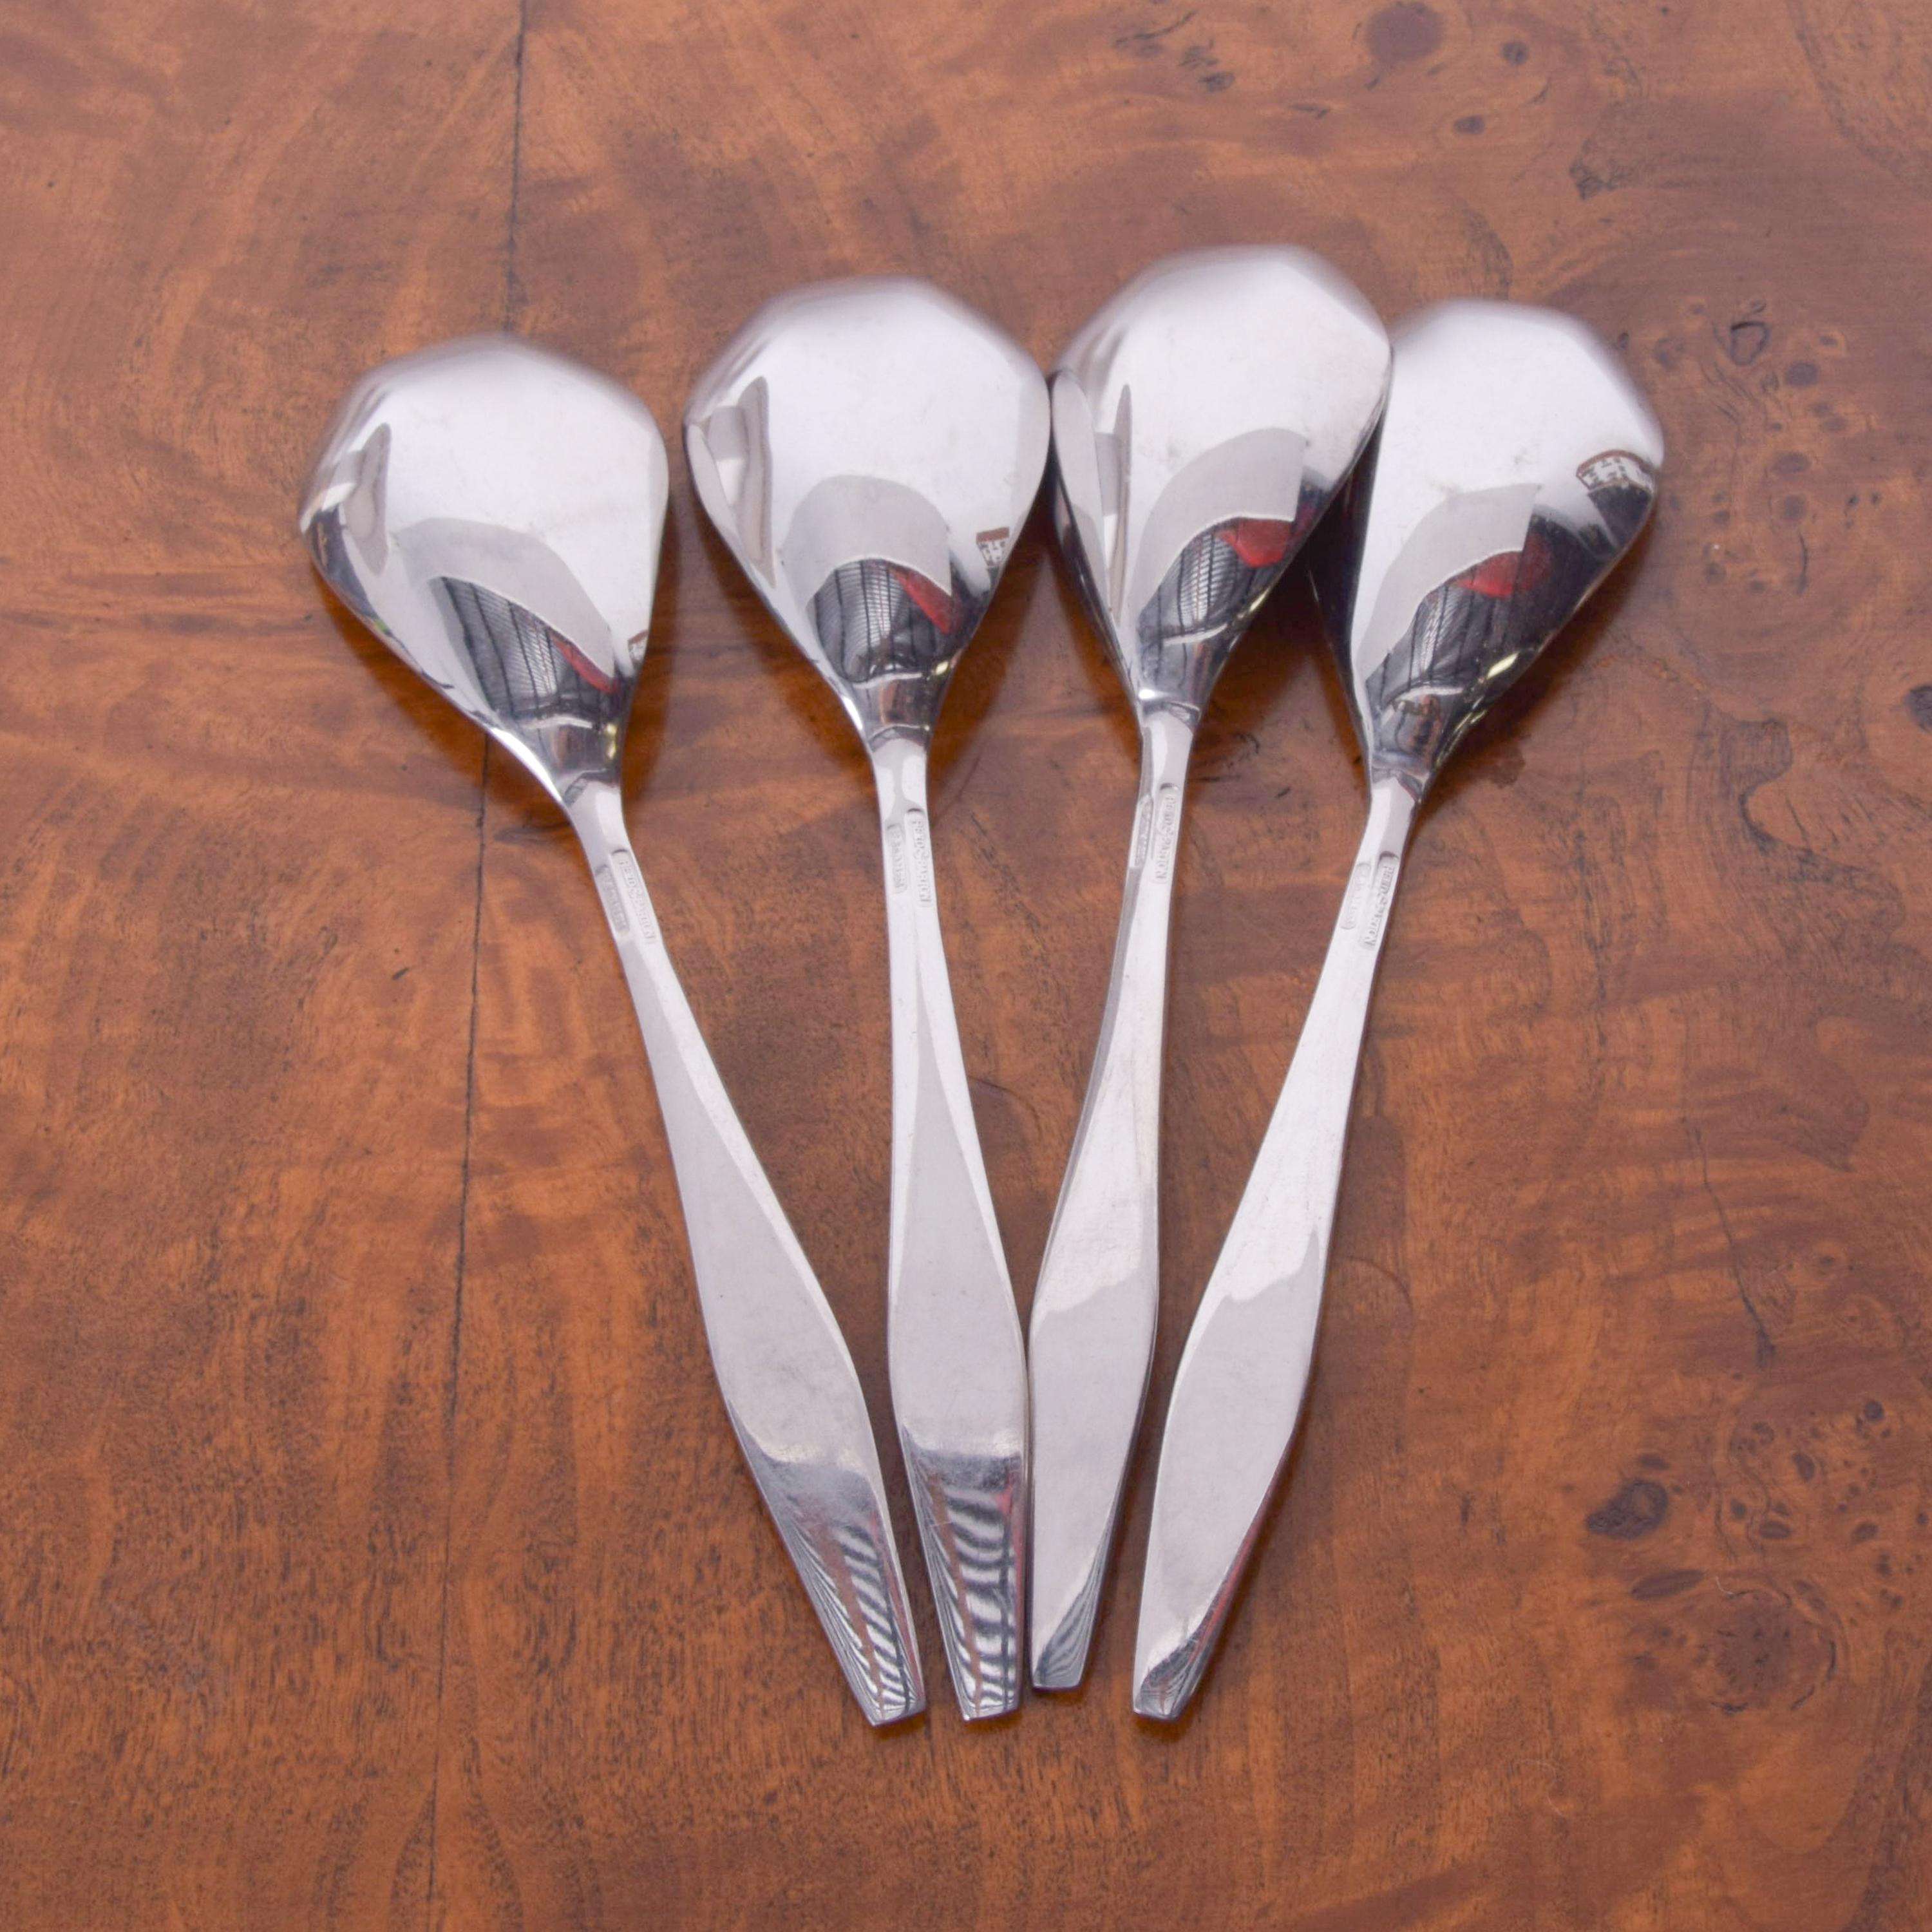 Gio Ponti Diamond Stainless Steel Flatware Four Spoon Set by Reed & Barton, 1958 In Good Condition For Sale In Chula Vista, CA